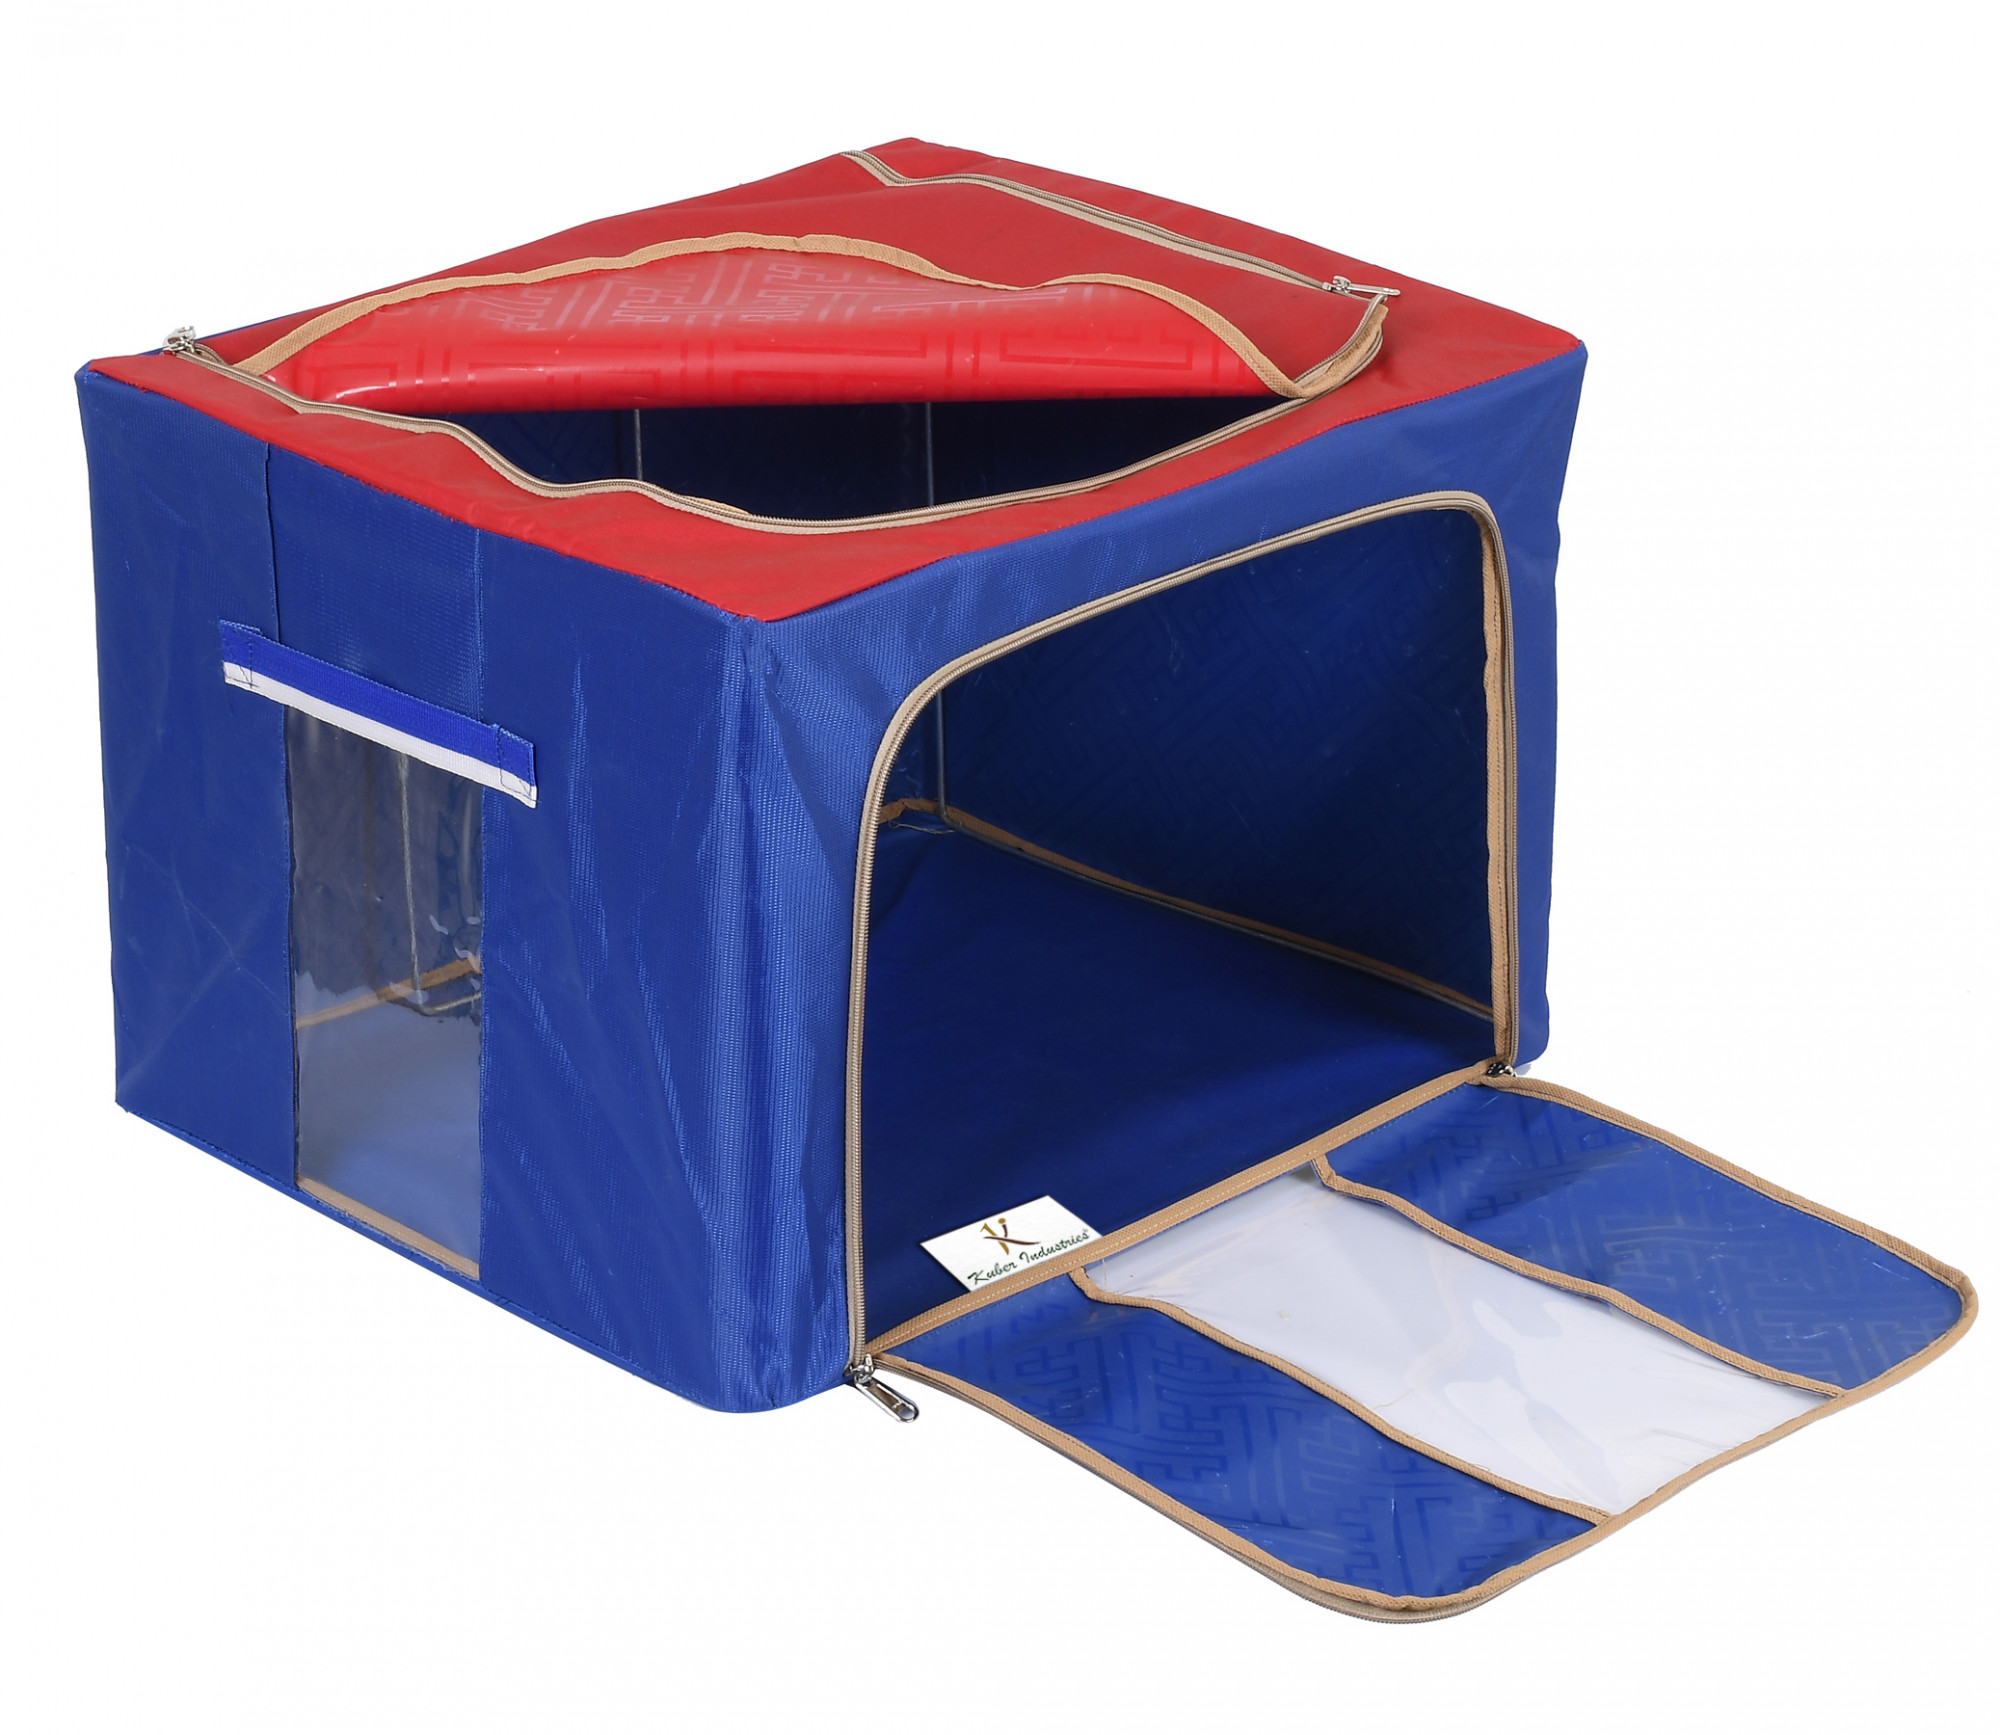 Kuber Industries Steel Frame Storage Box/Organizer For Clothing, Blankets, Bedding With Clear Window, 24Ltr. (Red & Blue)-44KM0285